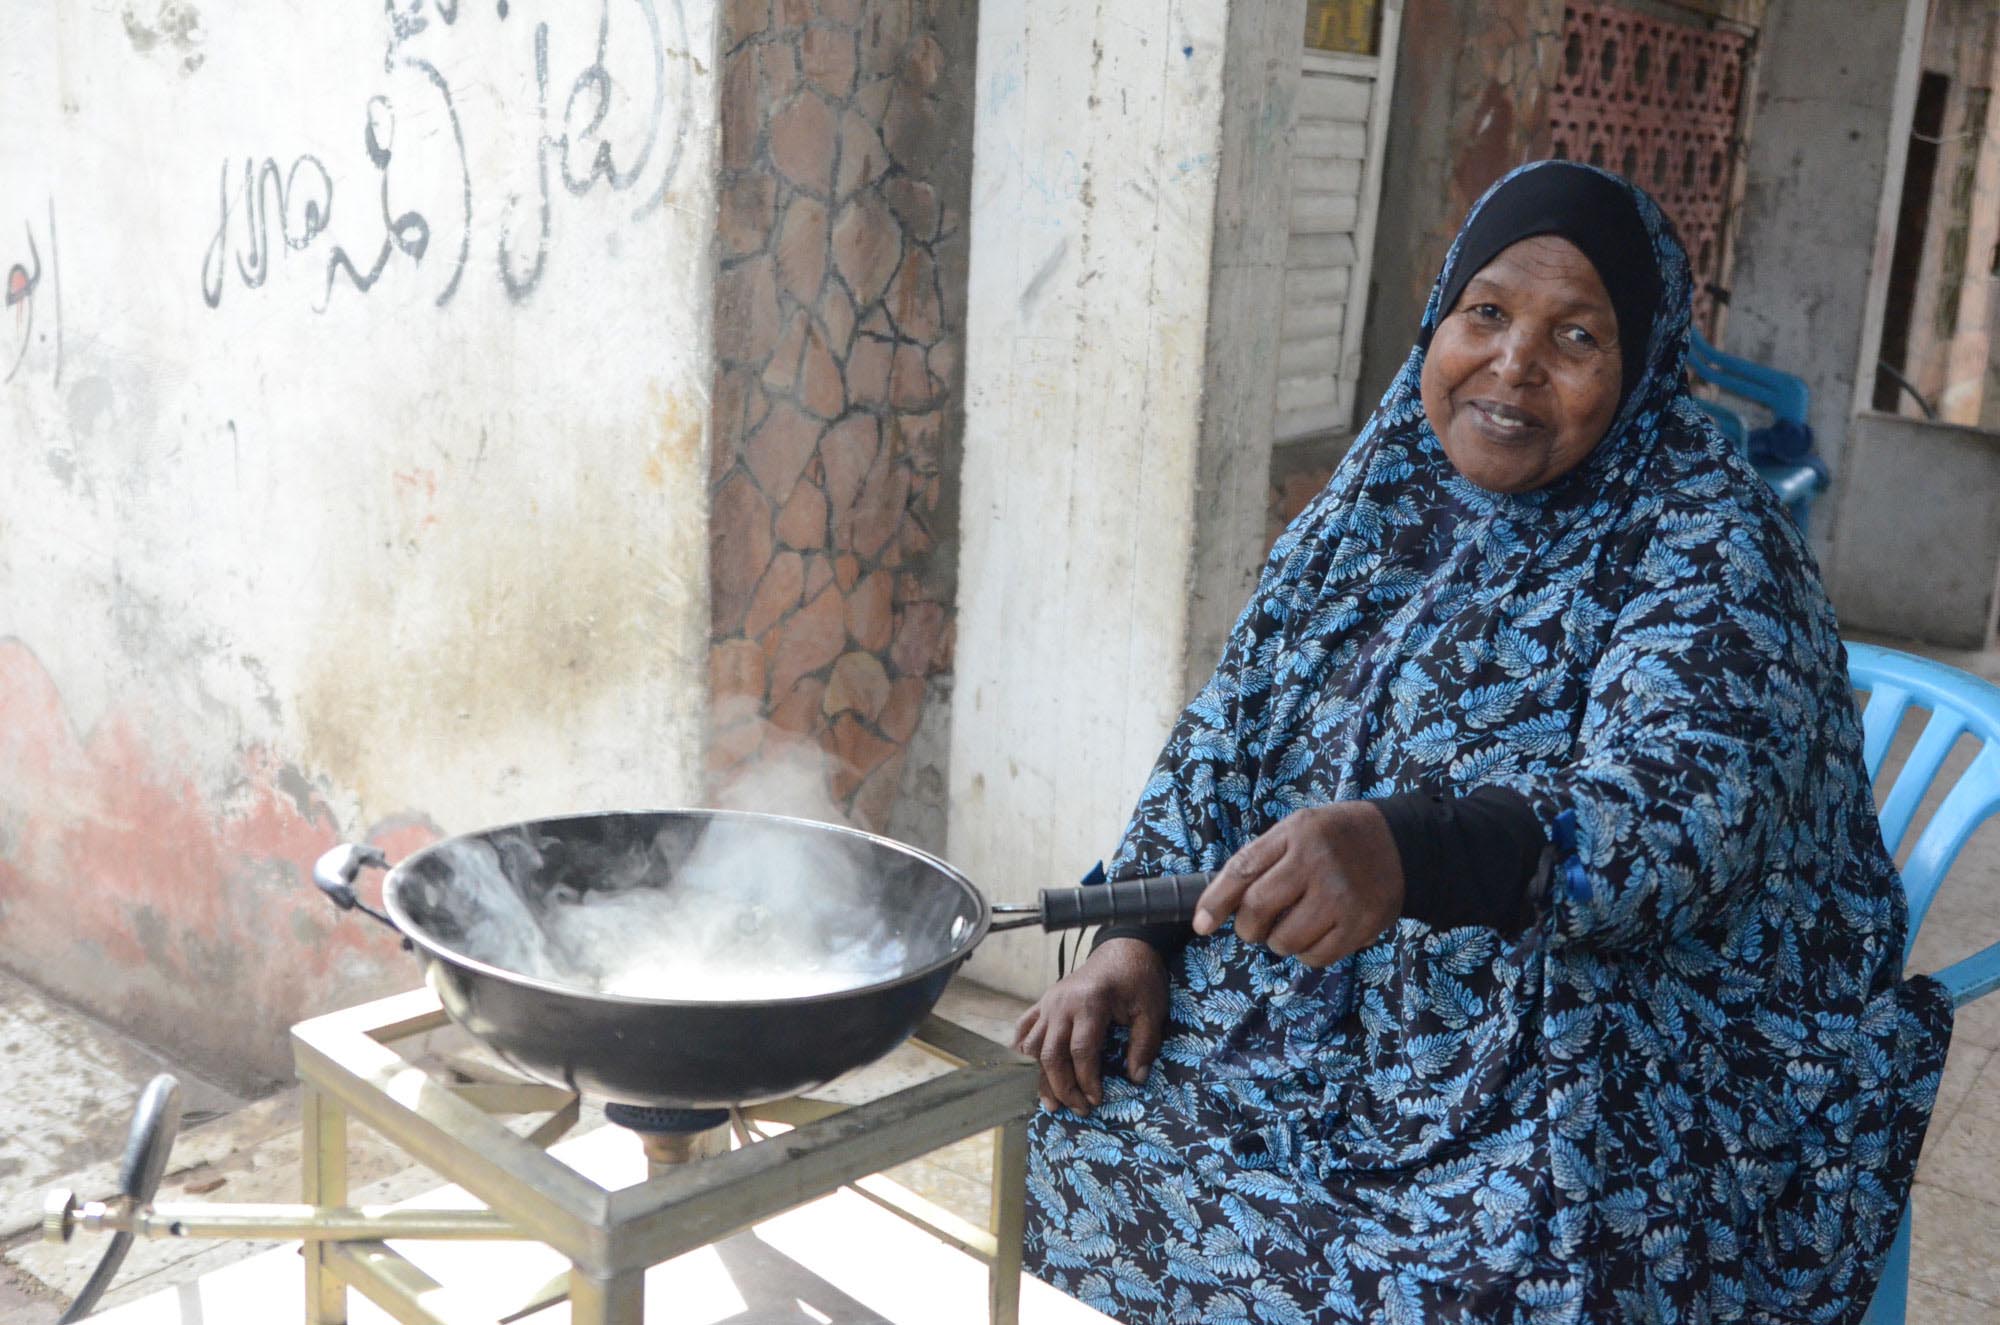 Gaza biogas digesters enable Mariam to cook for her family.